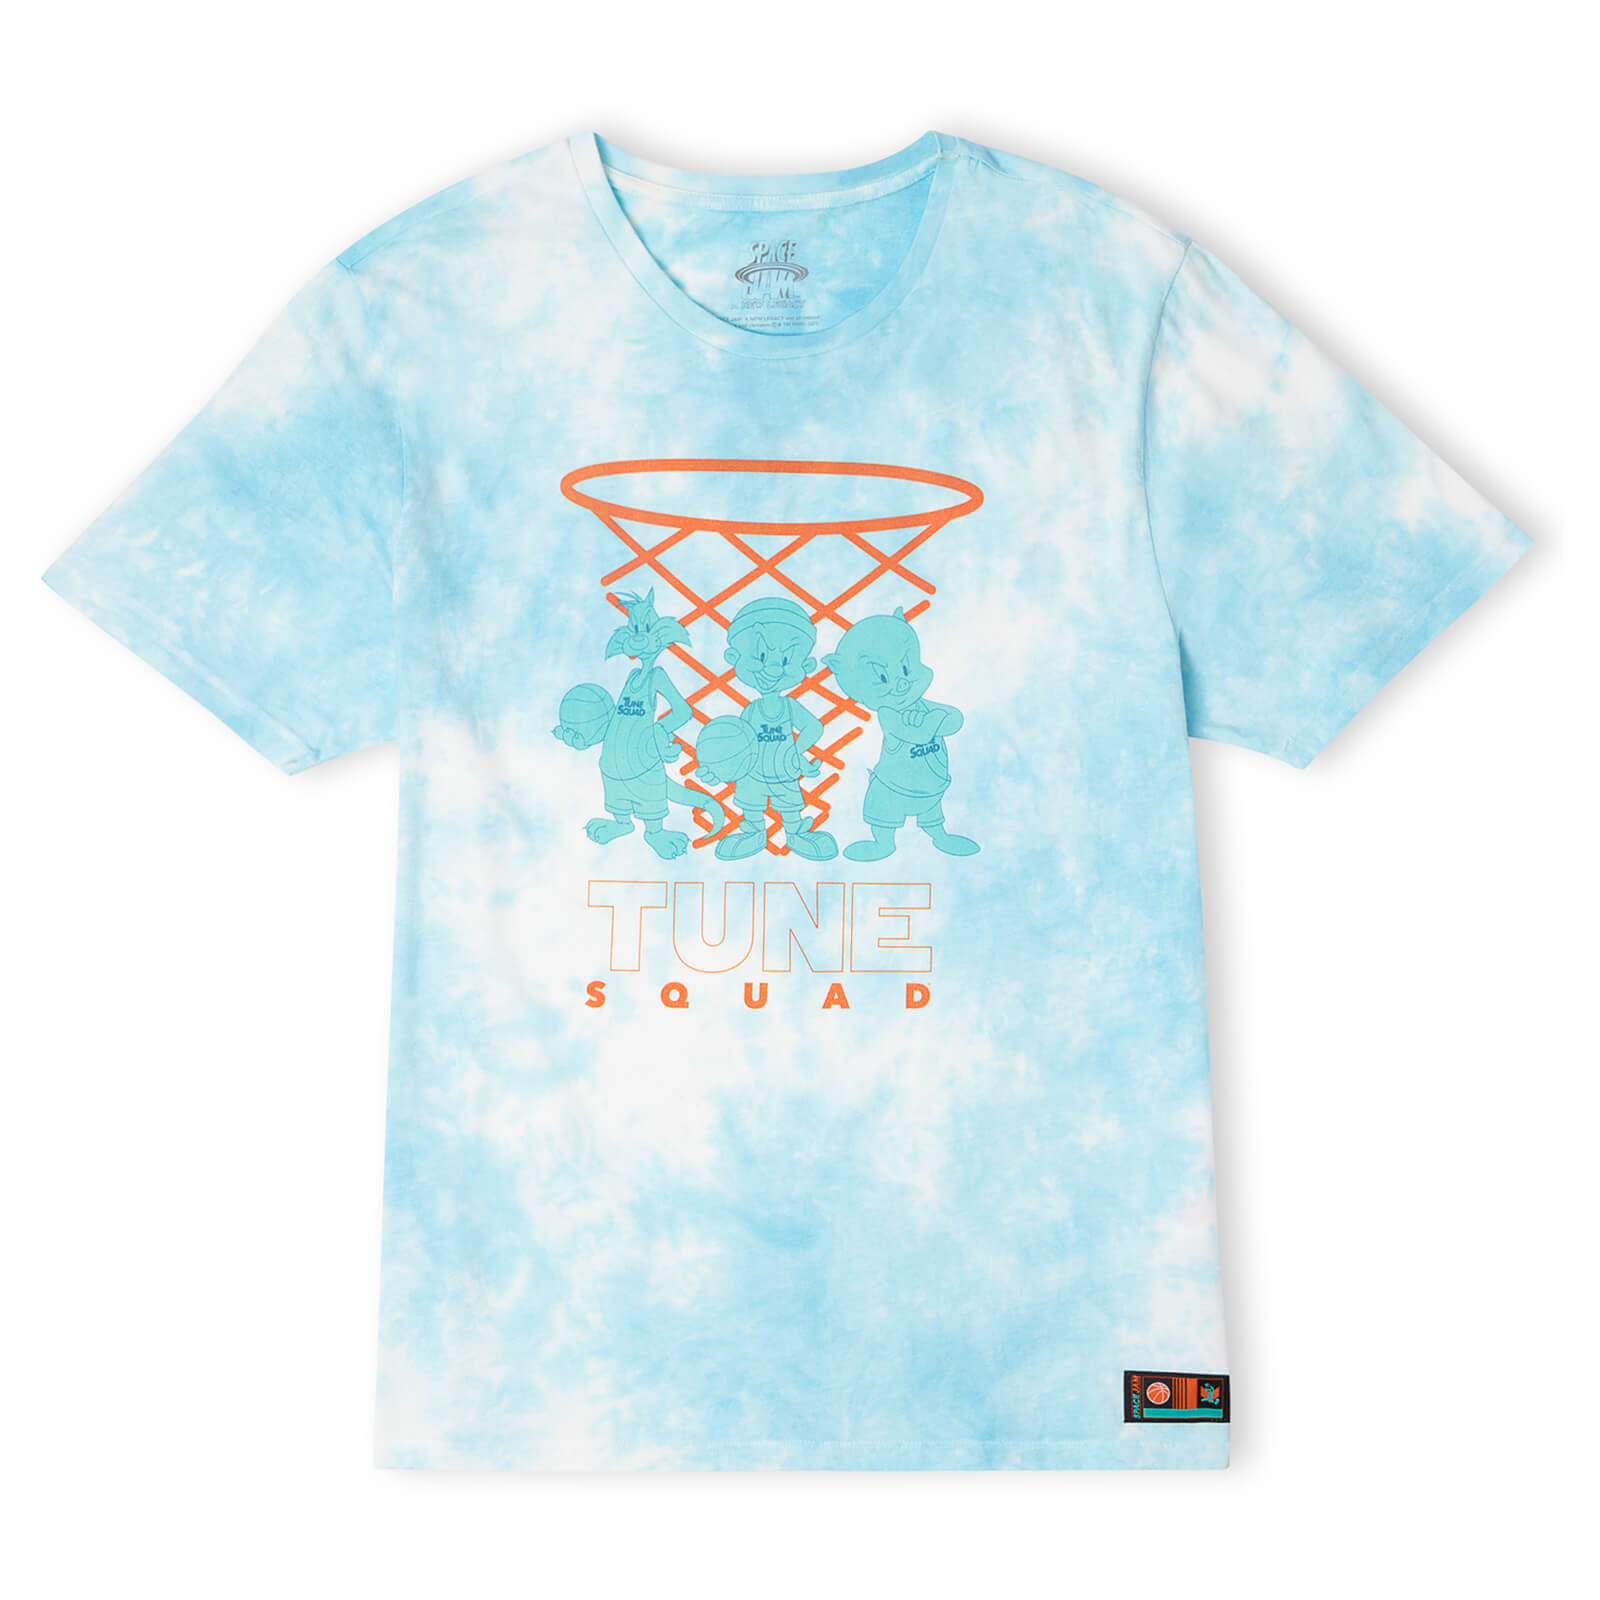 Image of Space Jam Tune Squad Characters Unisex T-Shirt - Turquoise Tie Dye - S - Turquoise Tie